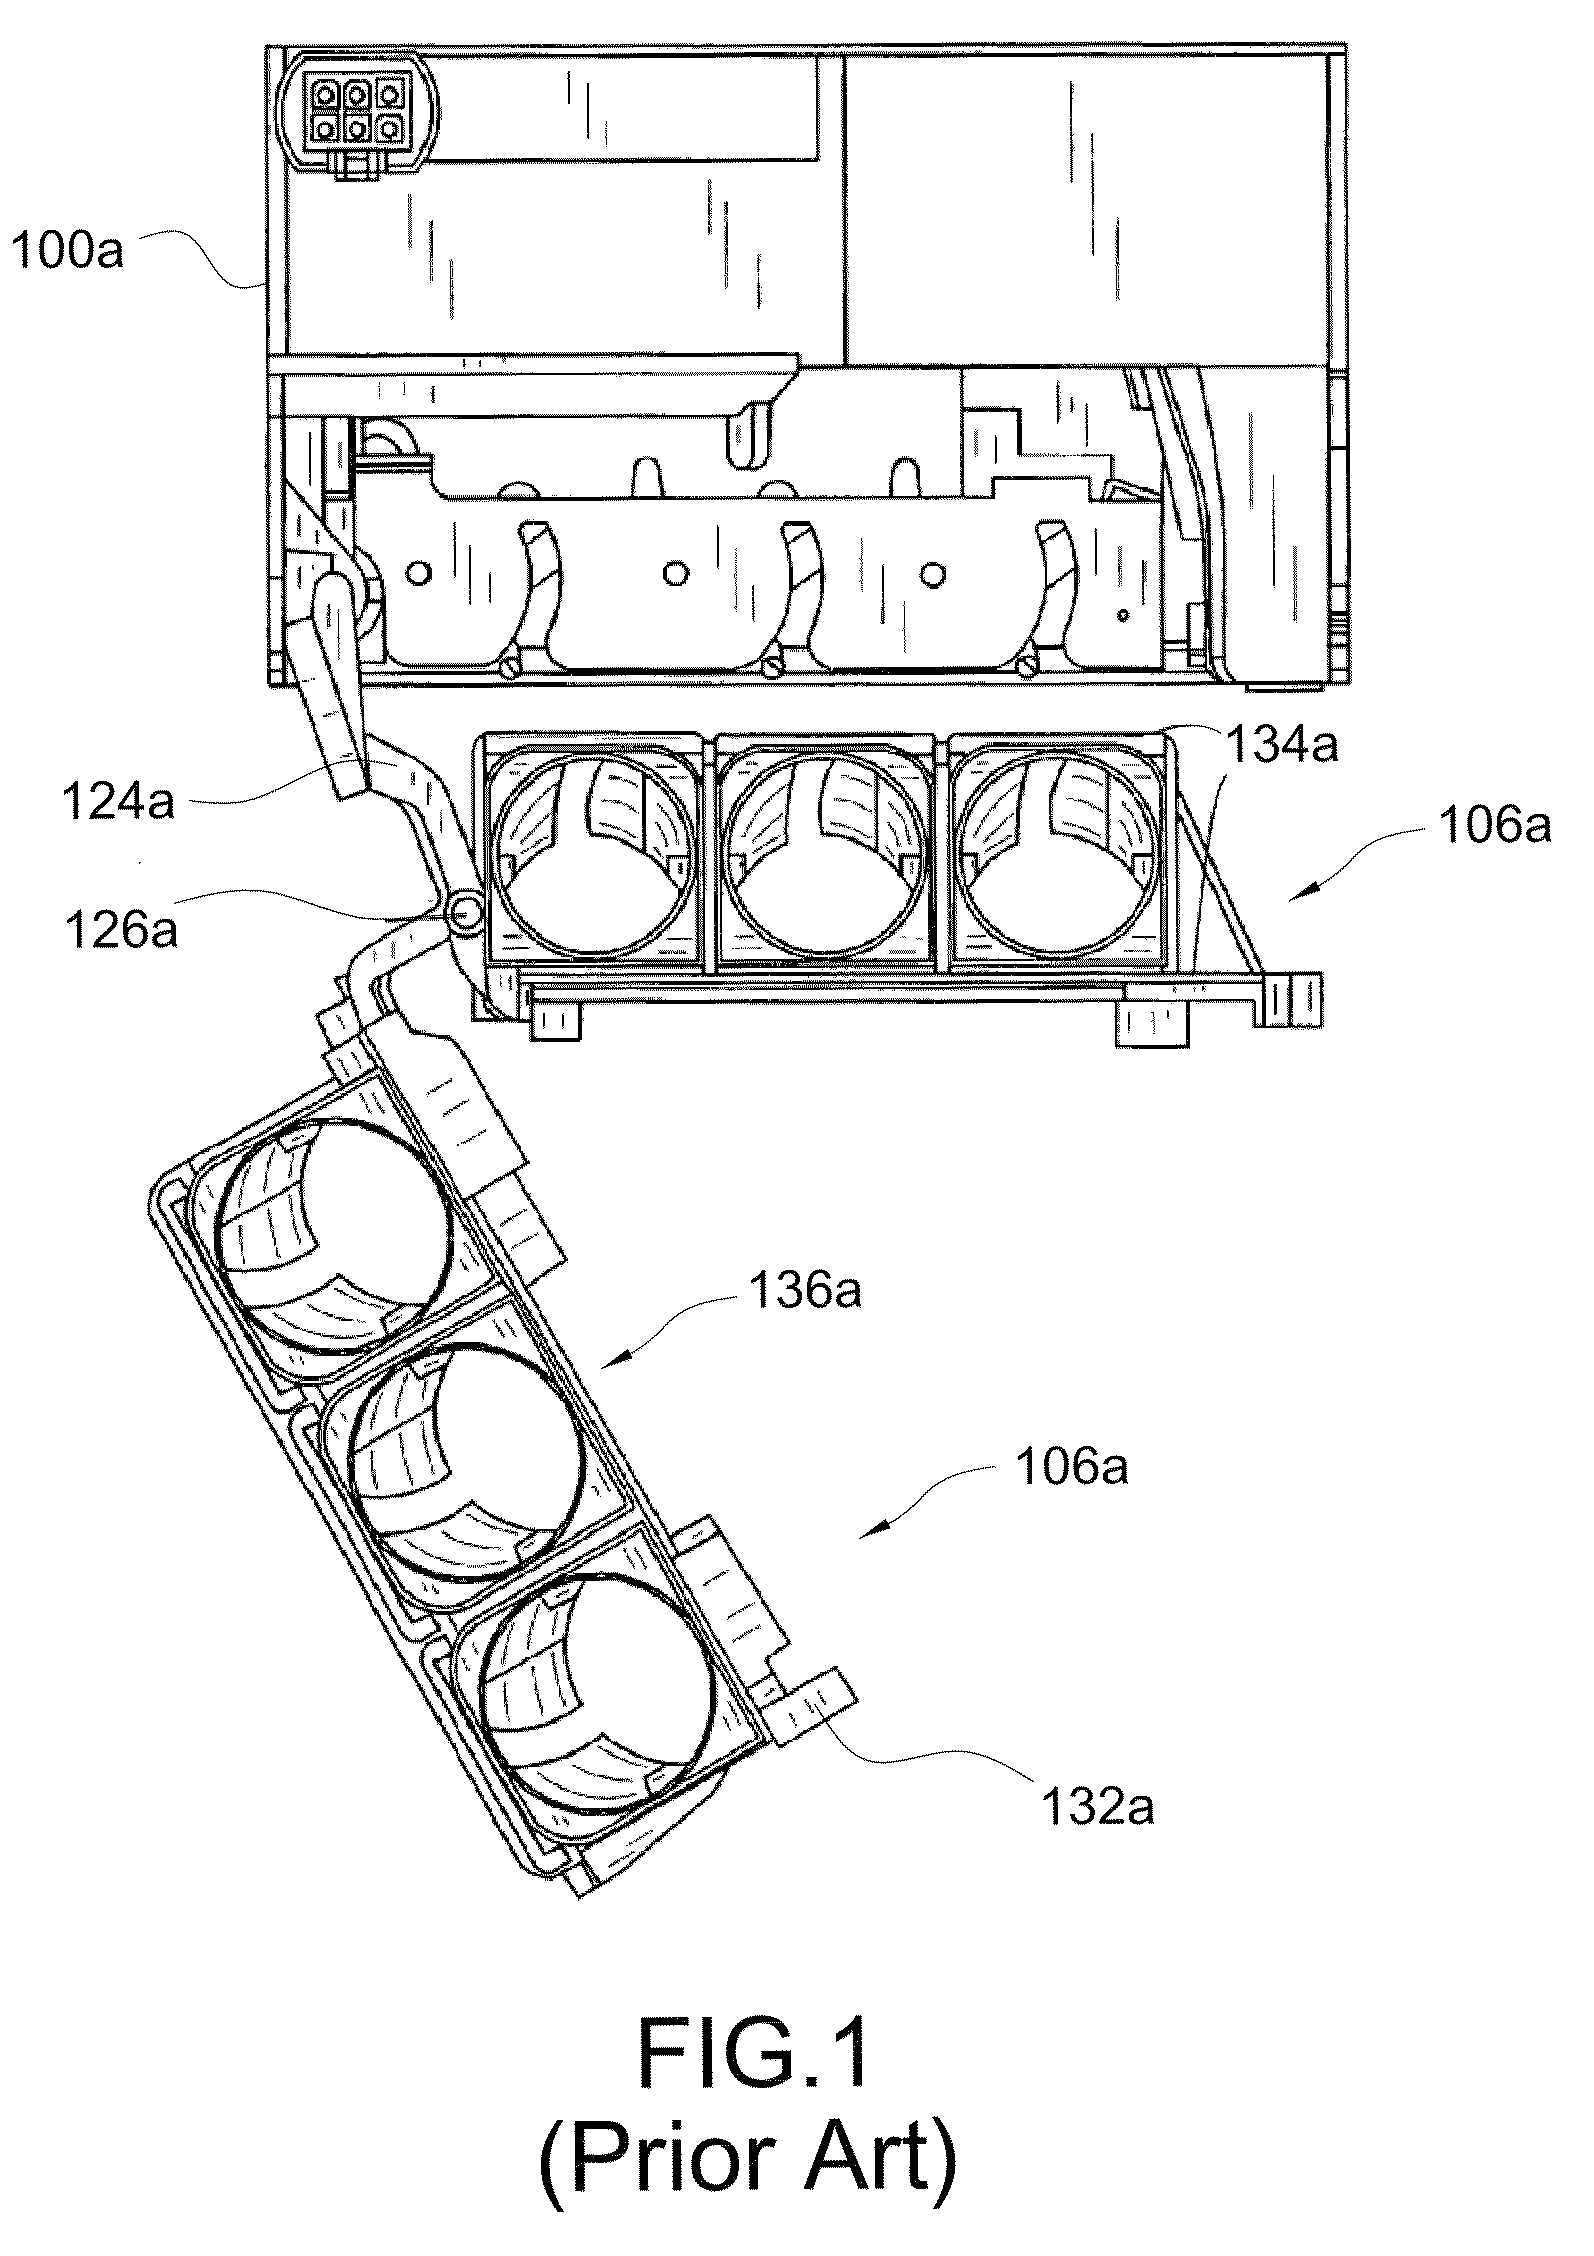 Coin dispensing and storing device